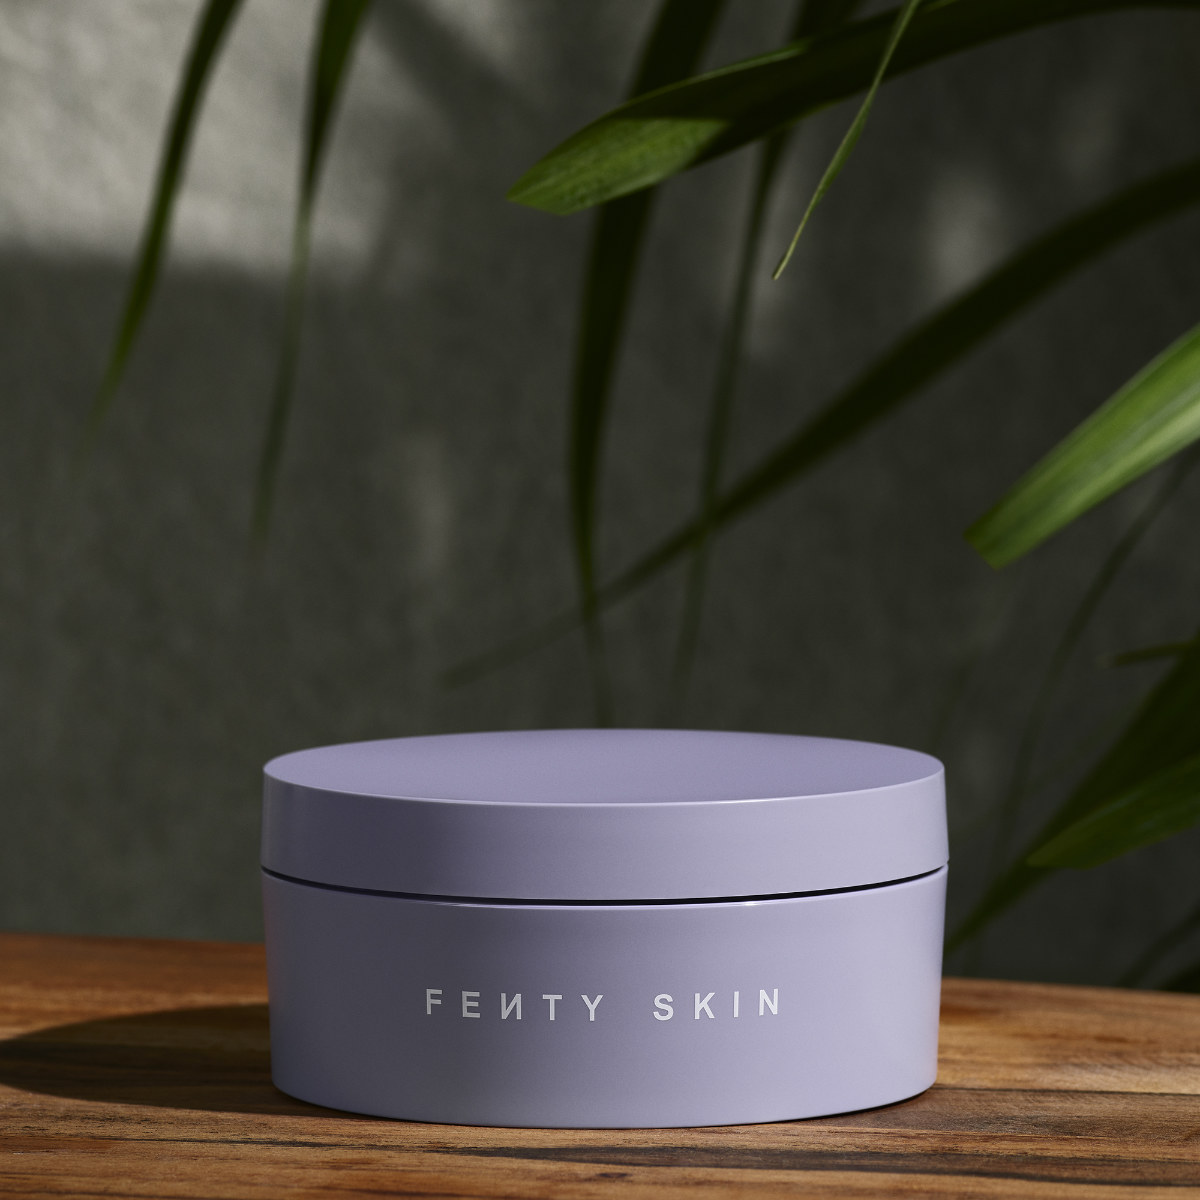 Fenty Introduces New Butta Drop Whipped Oil Body Cream